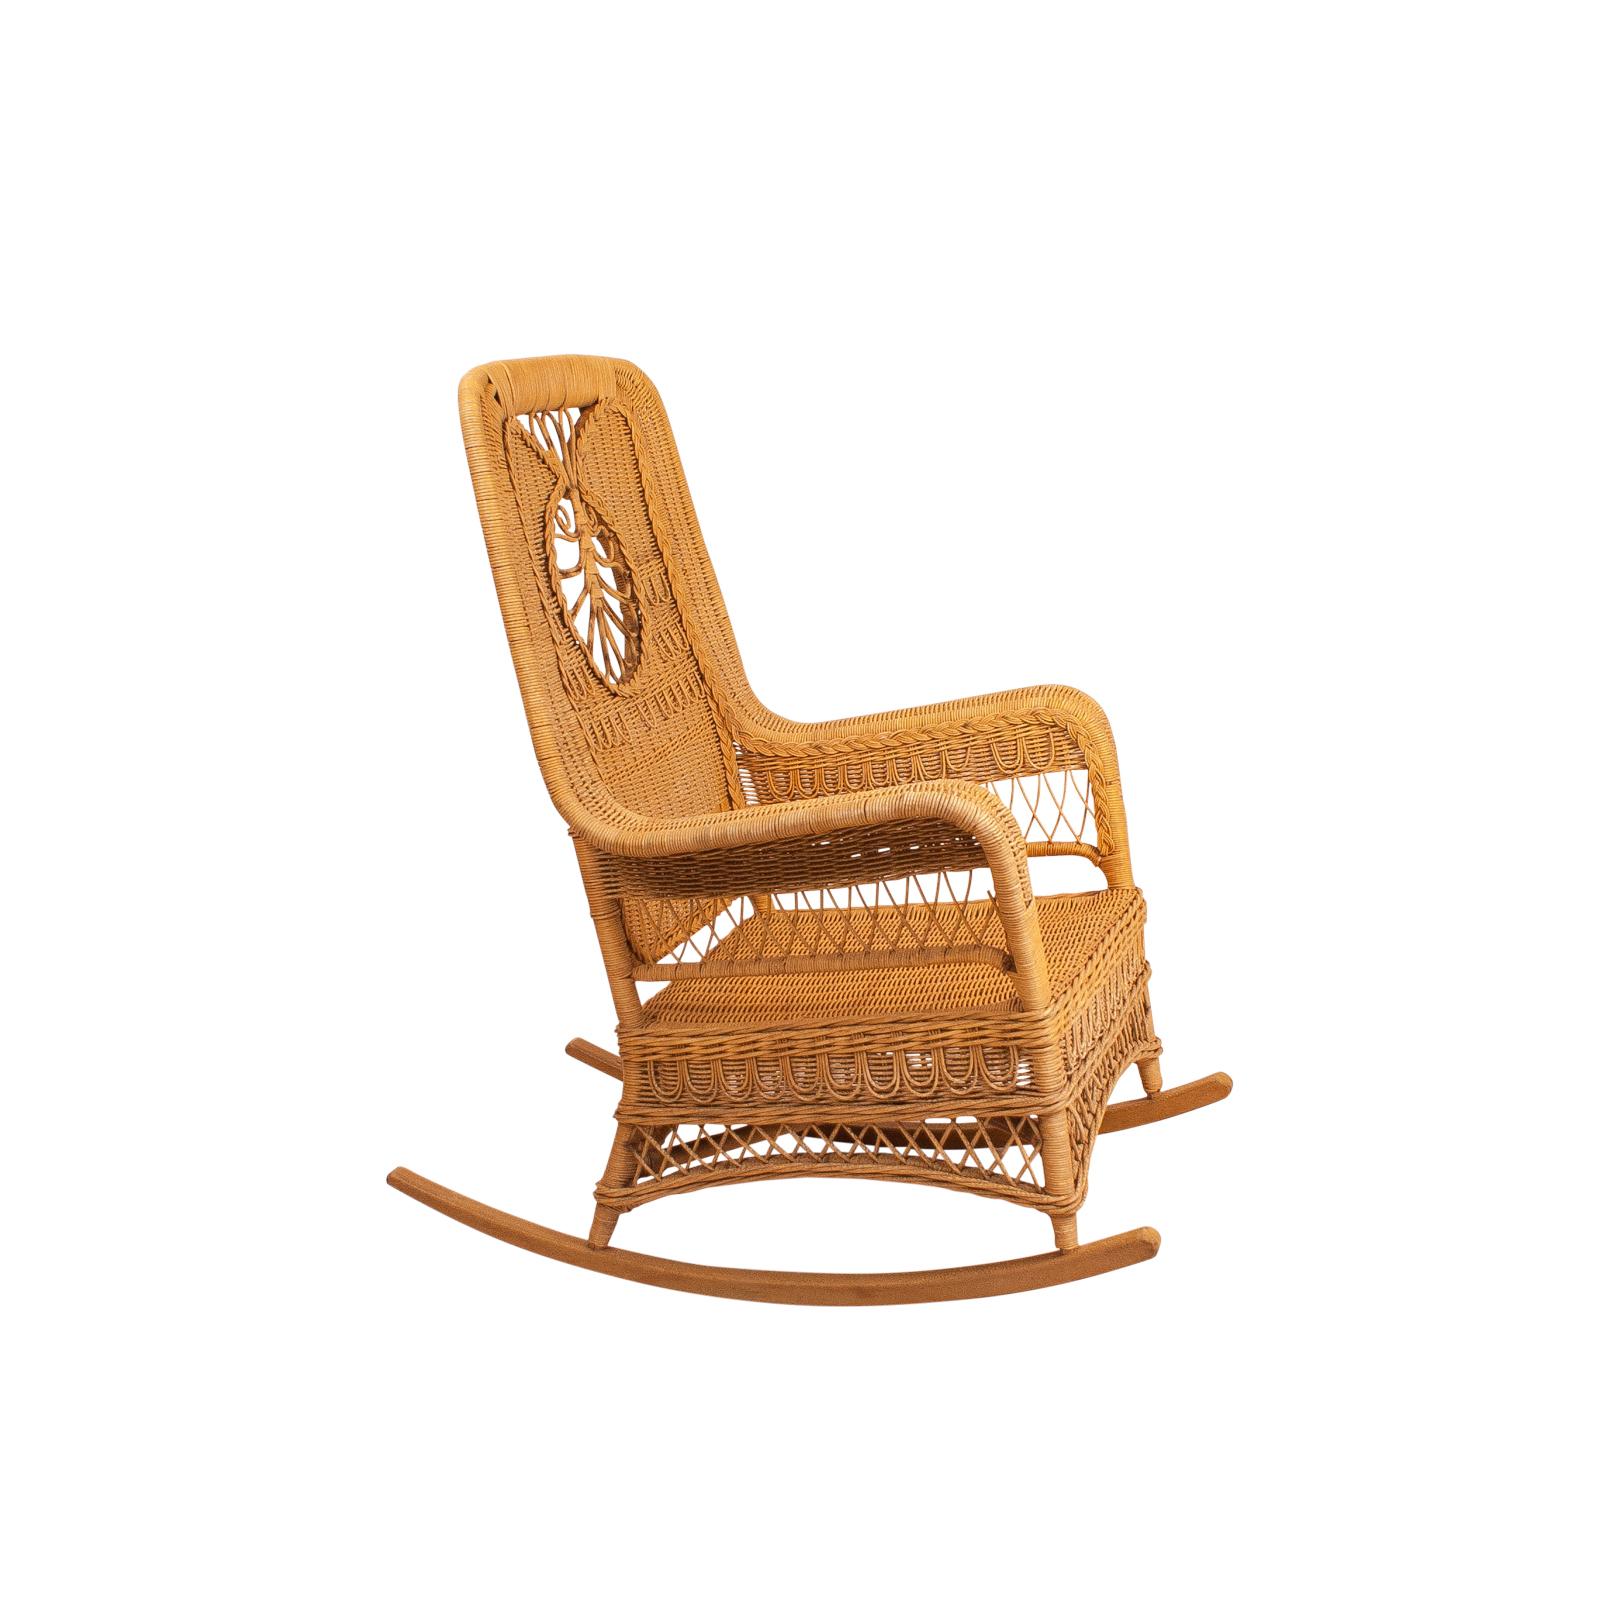 A large scale Vintage Hawaiian painted wicker rocking chair, circa 1950.